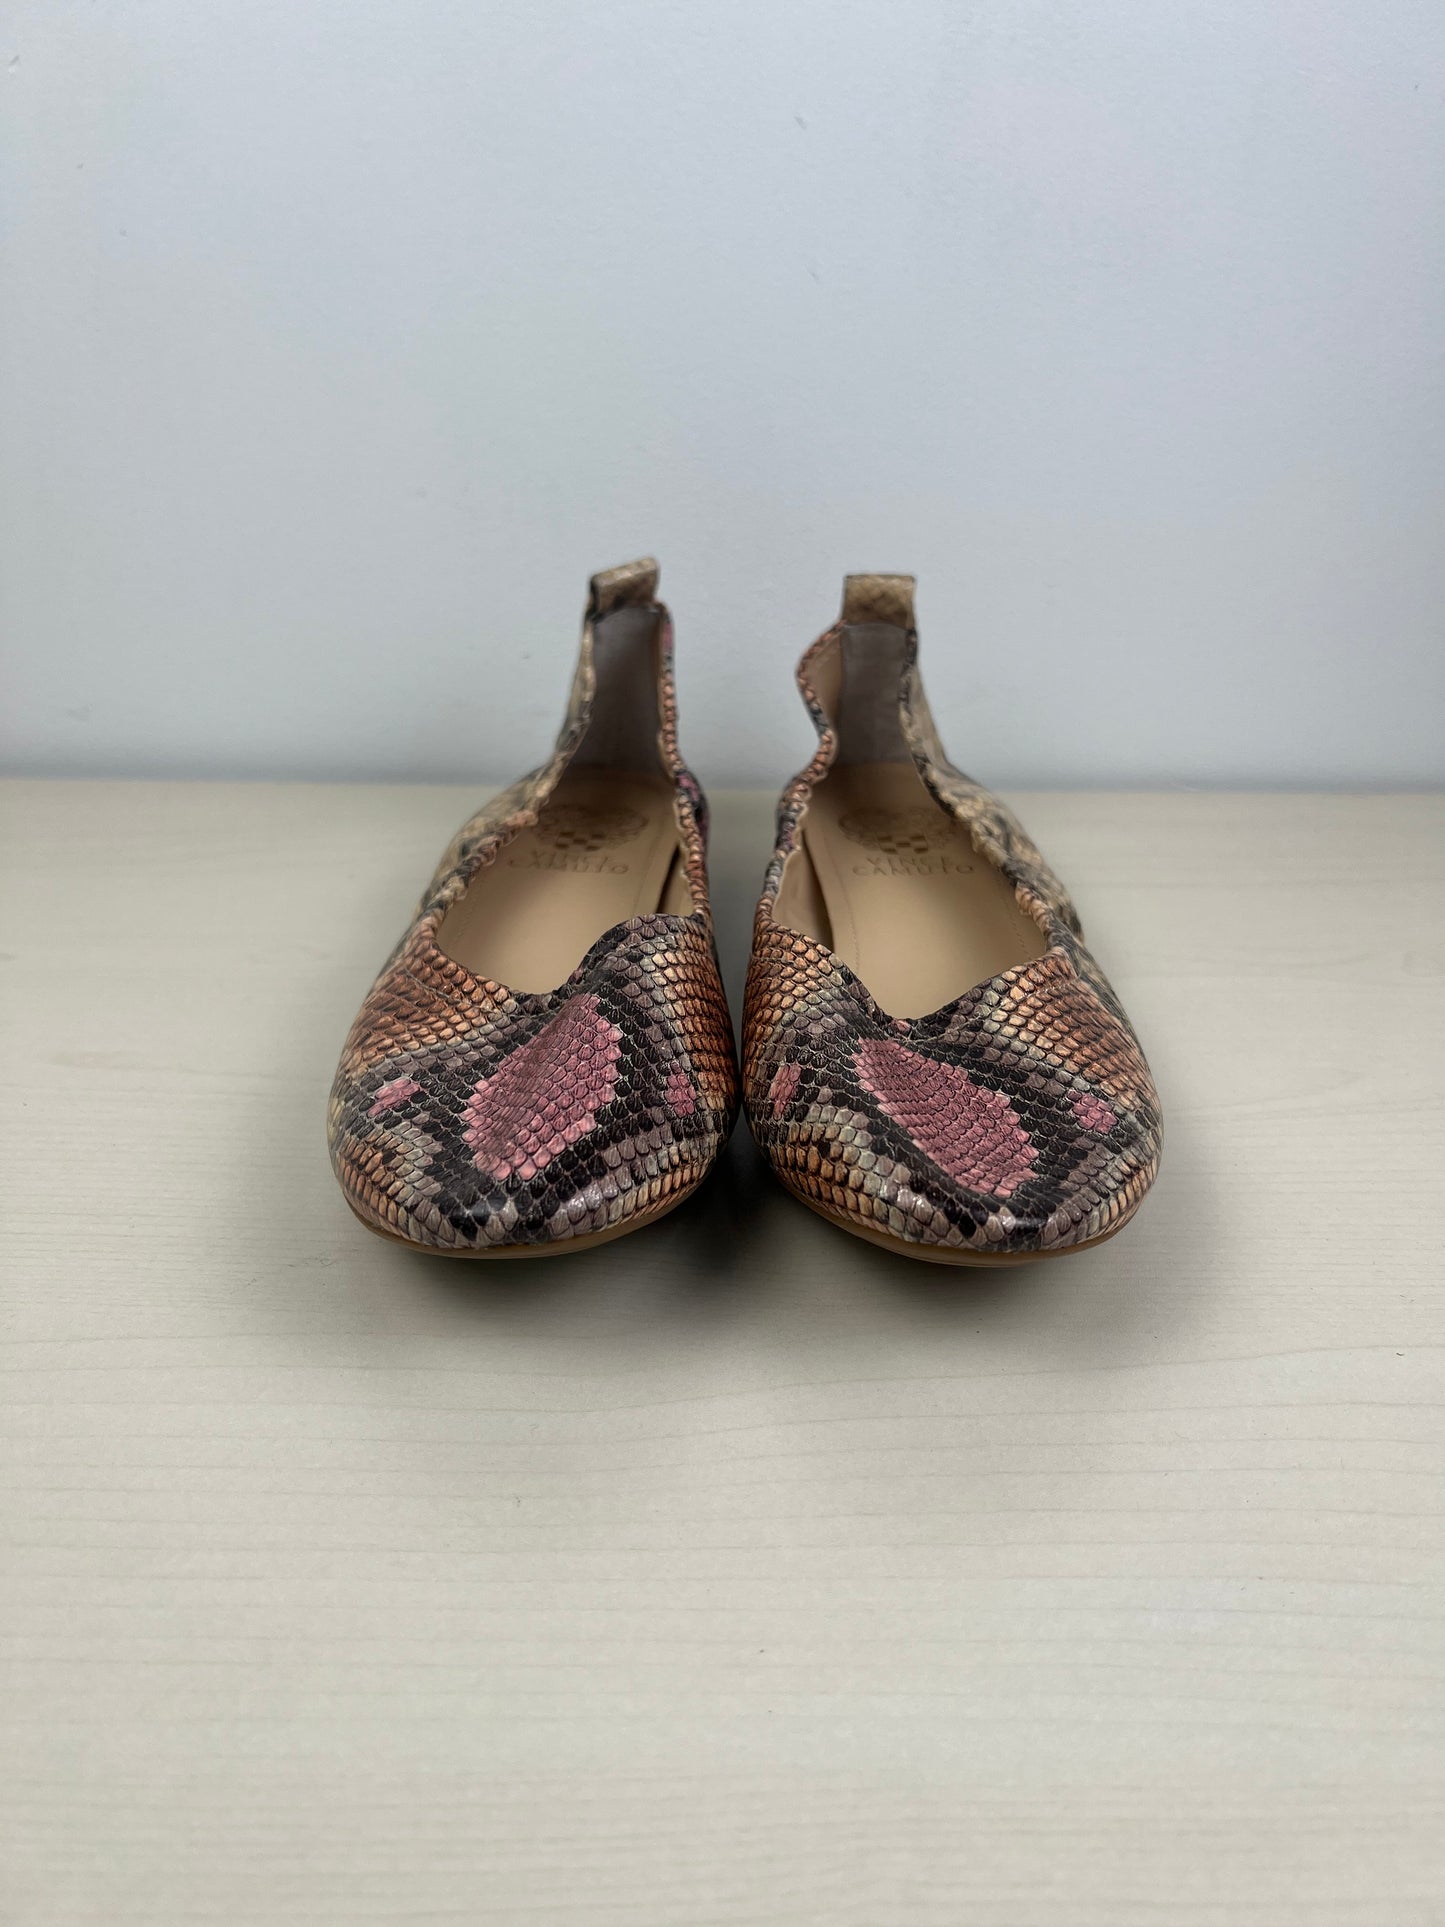 Shoes Flats By Vince Camuto  Size: 9